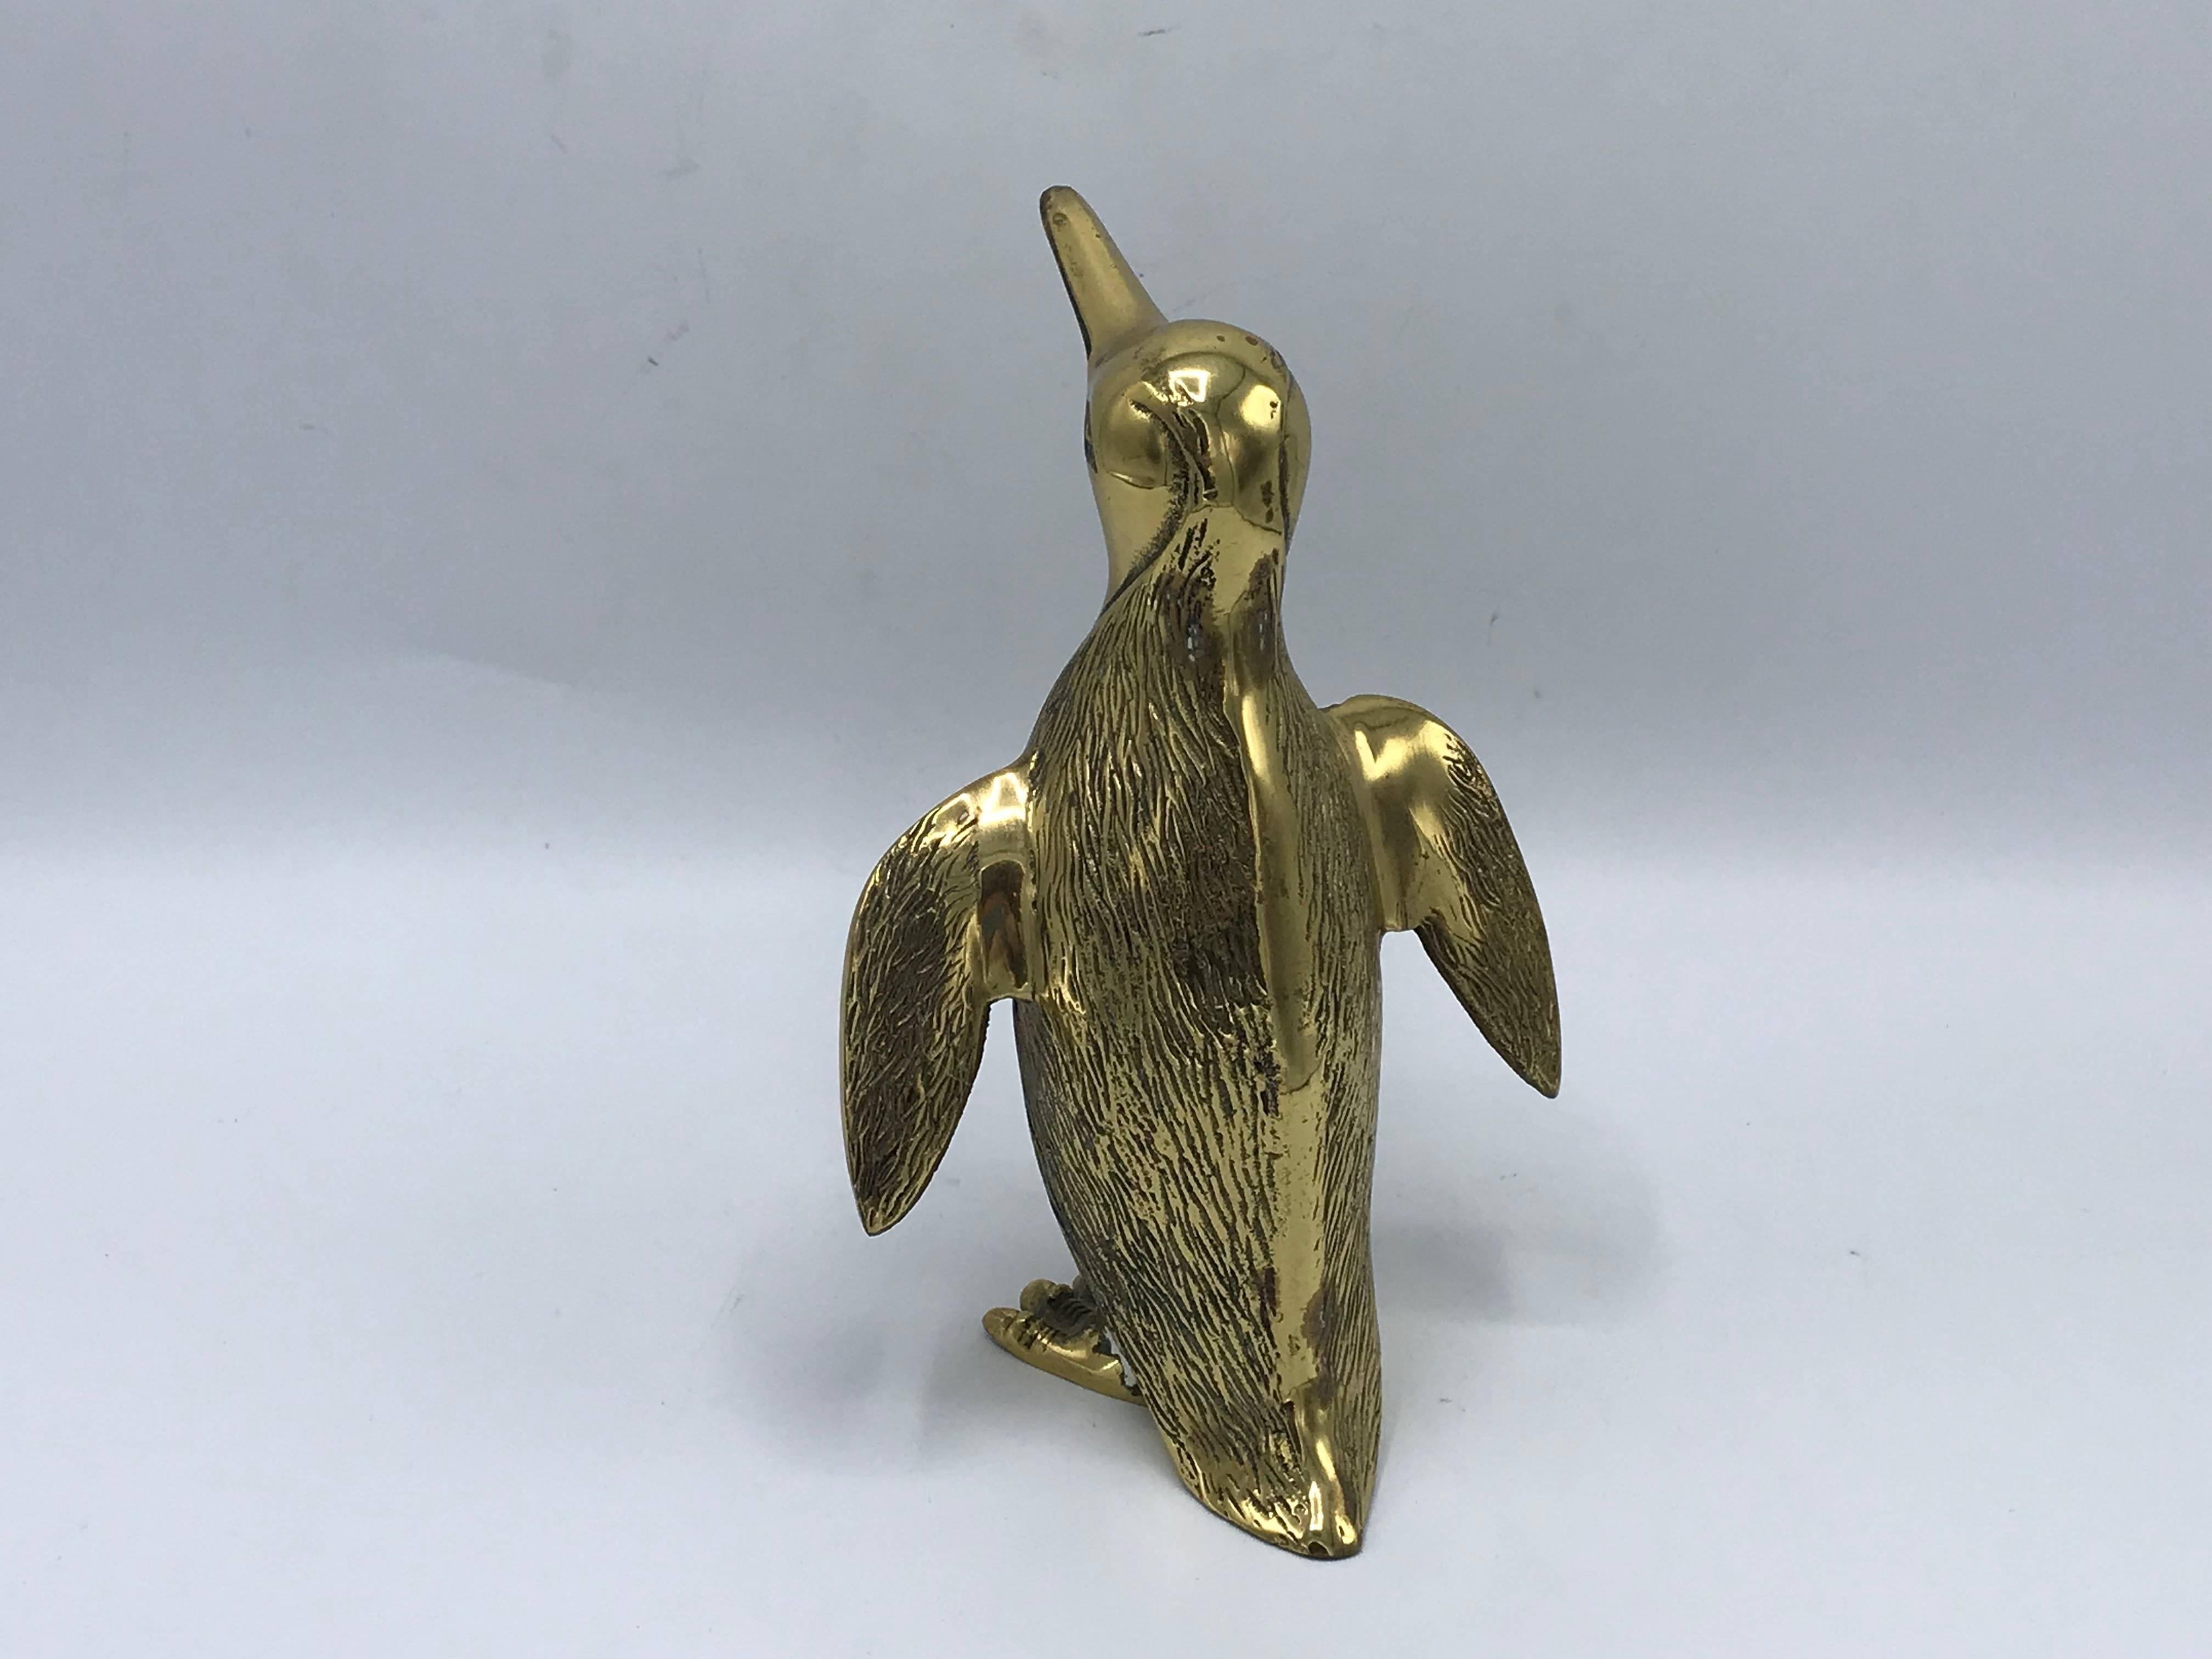 Offered is a beautiful, 1970s brass penguin bird sculpture. The piece is perfect for holiday decor!